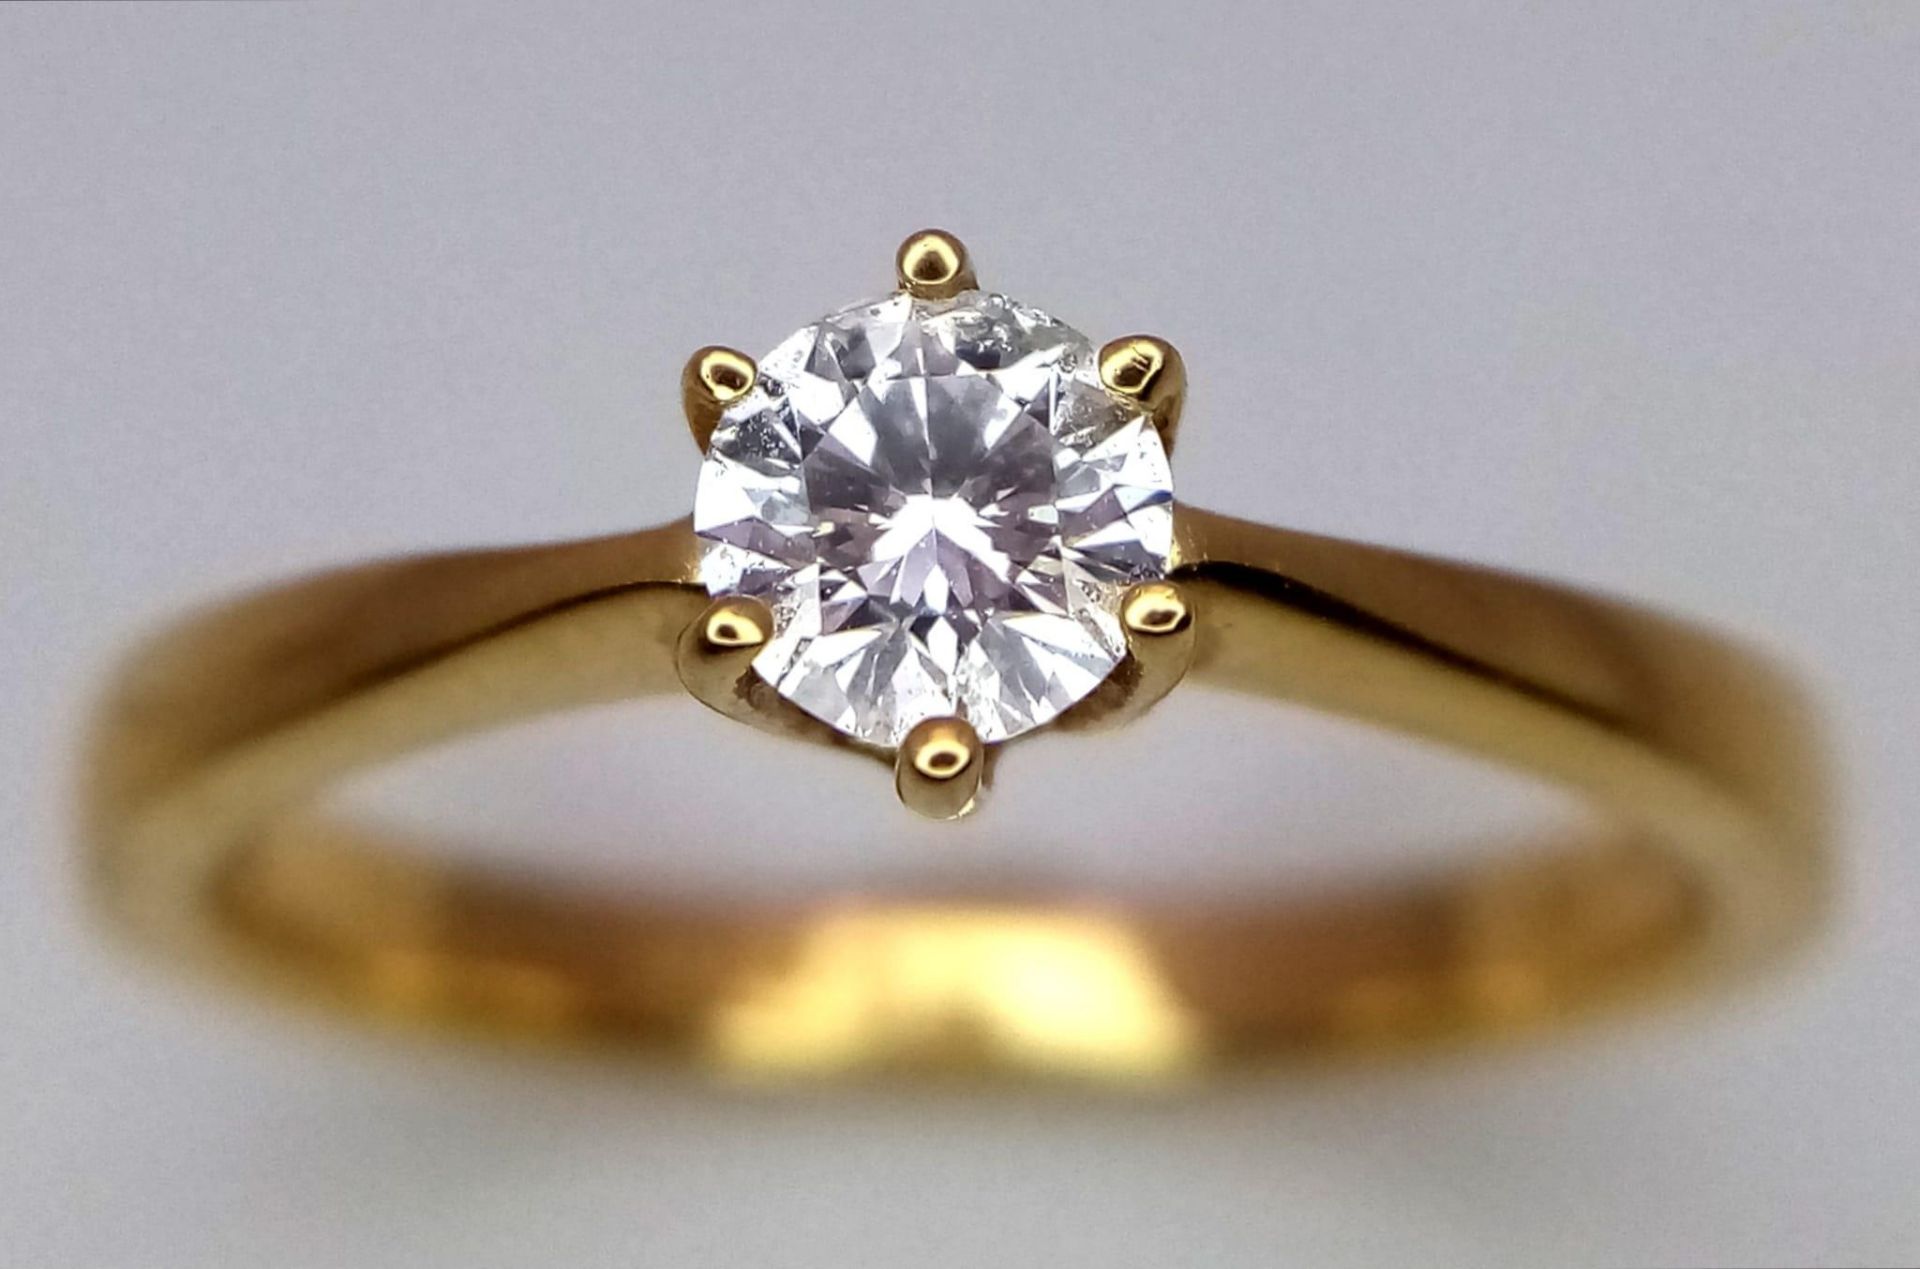 A 18CT YELLOW GOLD DIAMOND SOLITAIRE RING 0.30CT 3.1G SIZE N ref: P172 - Image 2 of 4